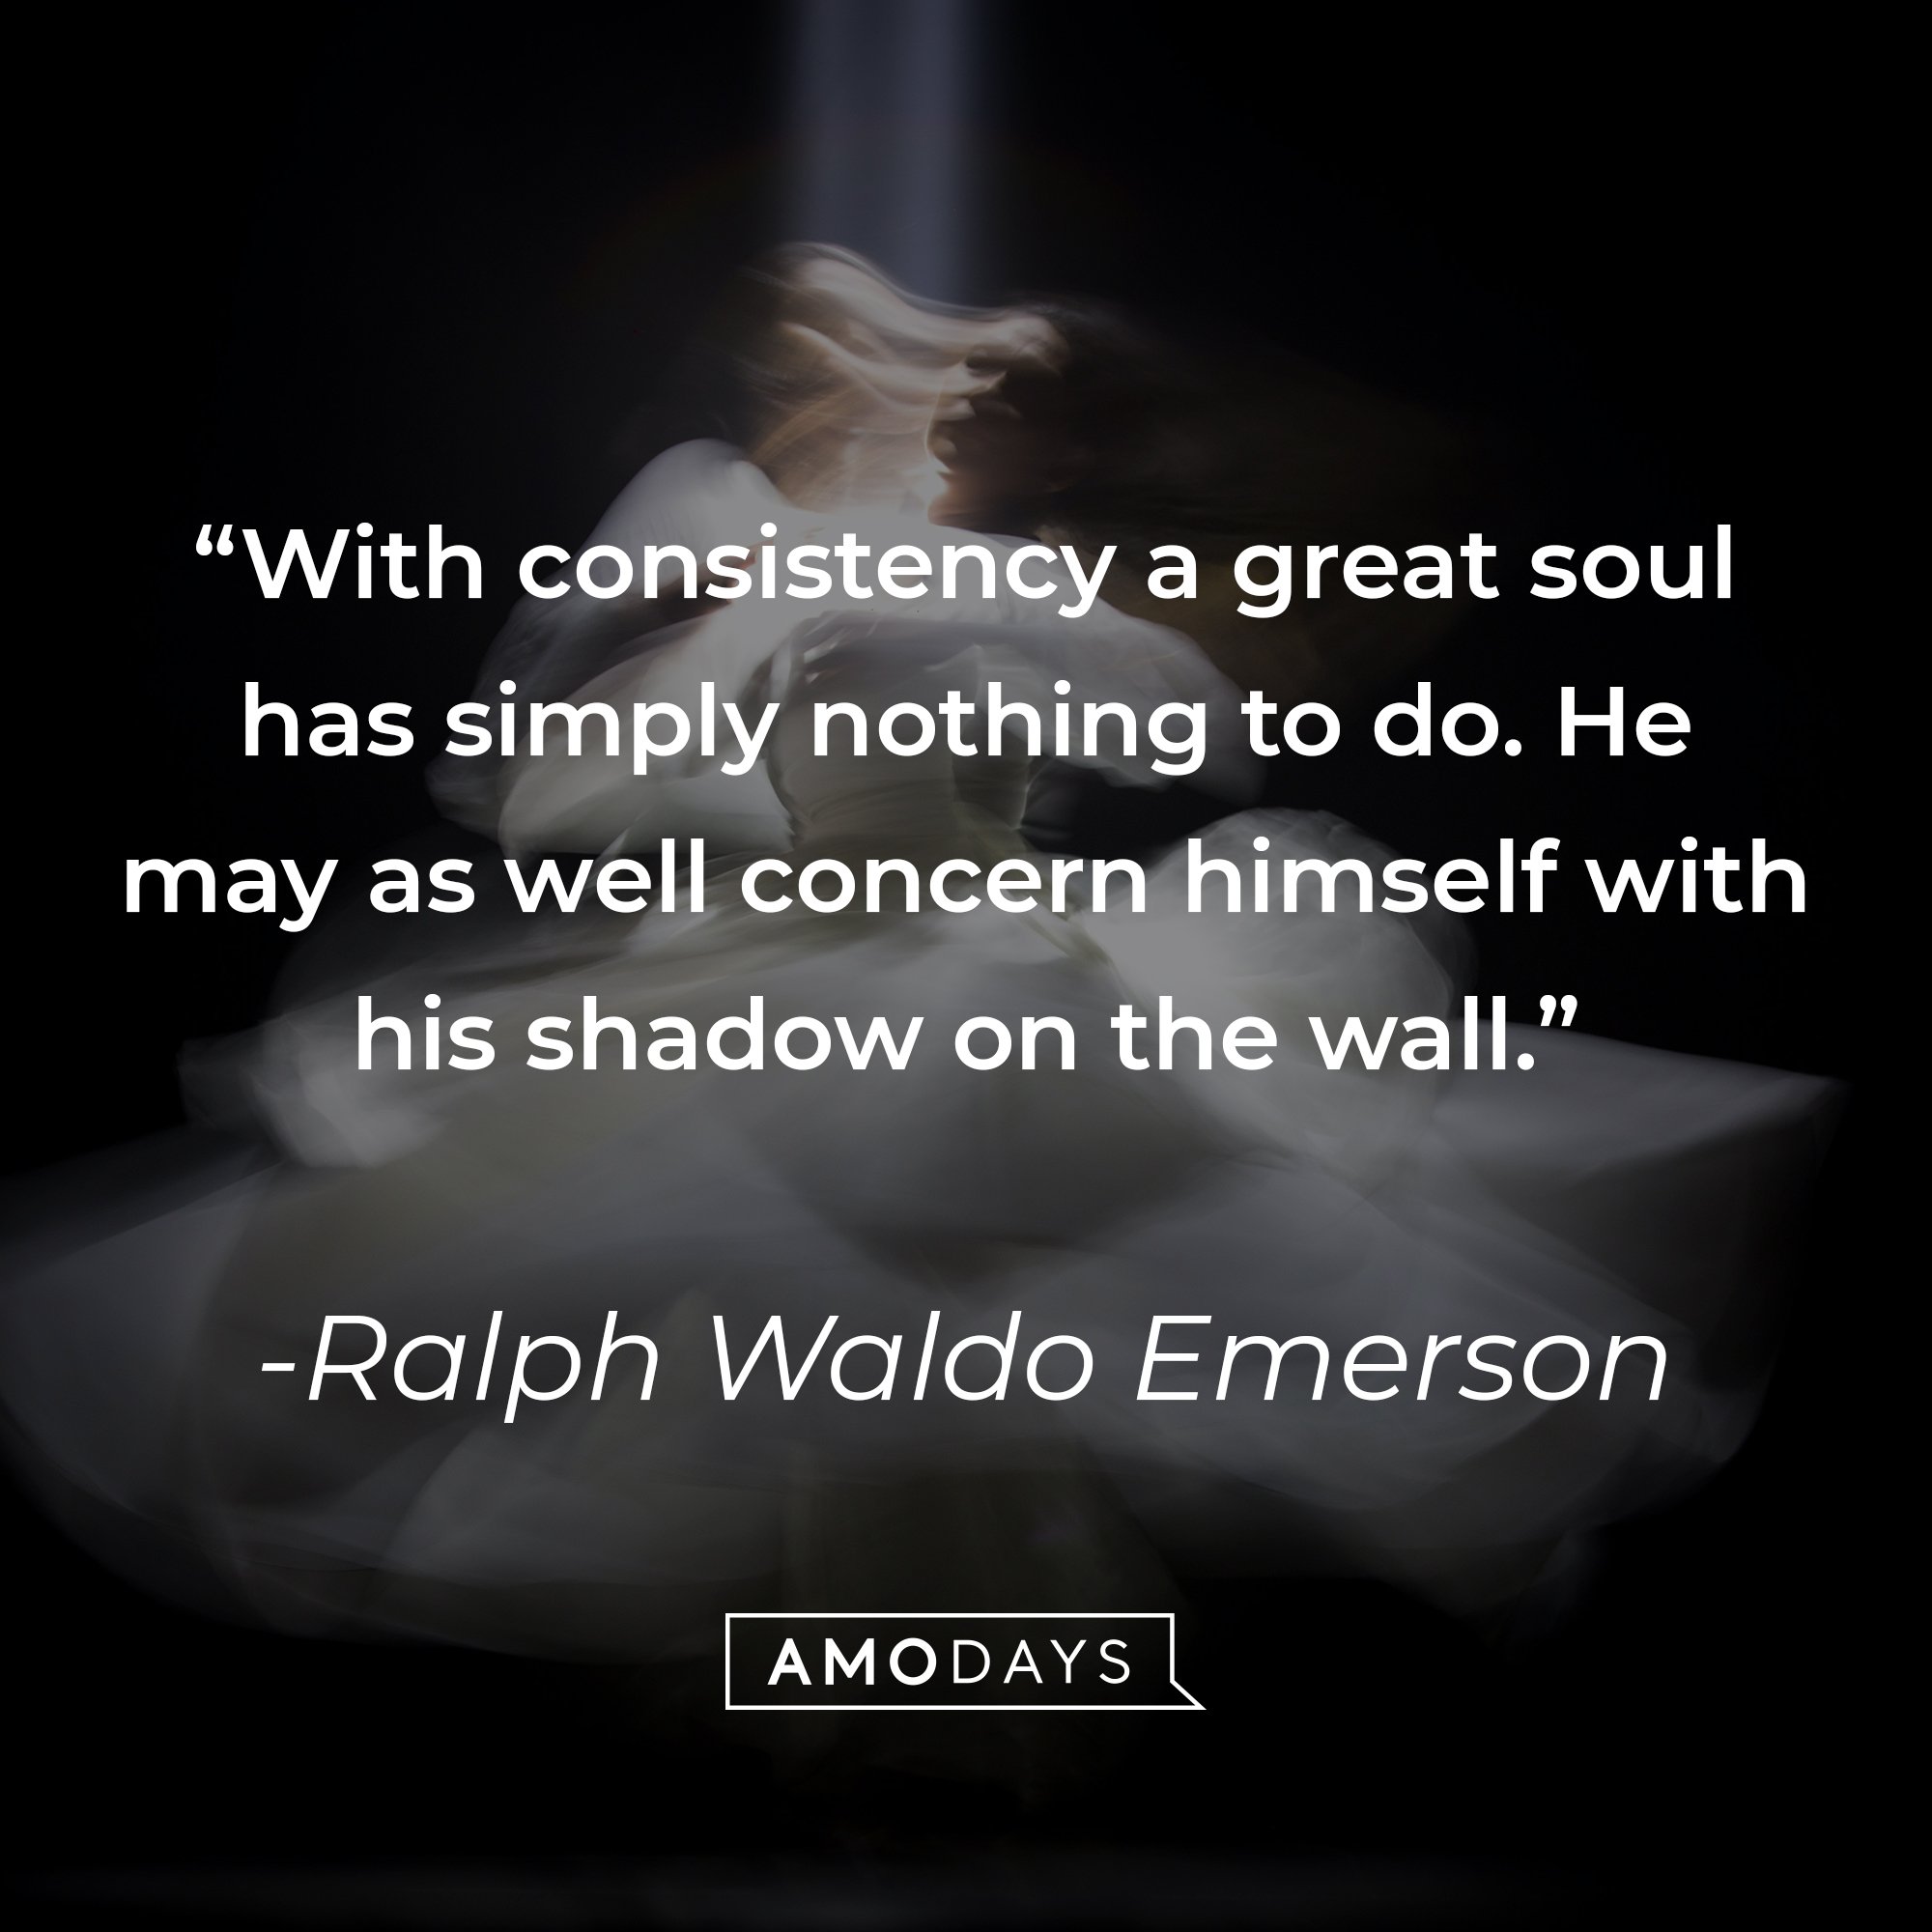 Ralph Waldo Emerson's quote: "With consistency a great soul has simply nothing to do. He may as well concern himself with his shadow on the wall." | Image: AmoDays